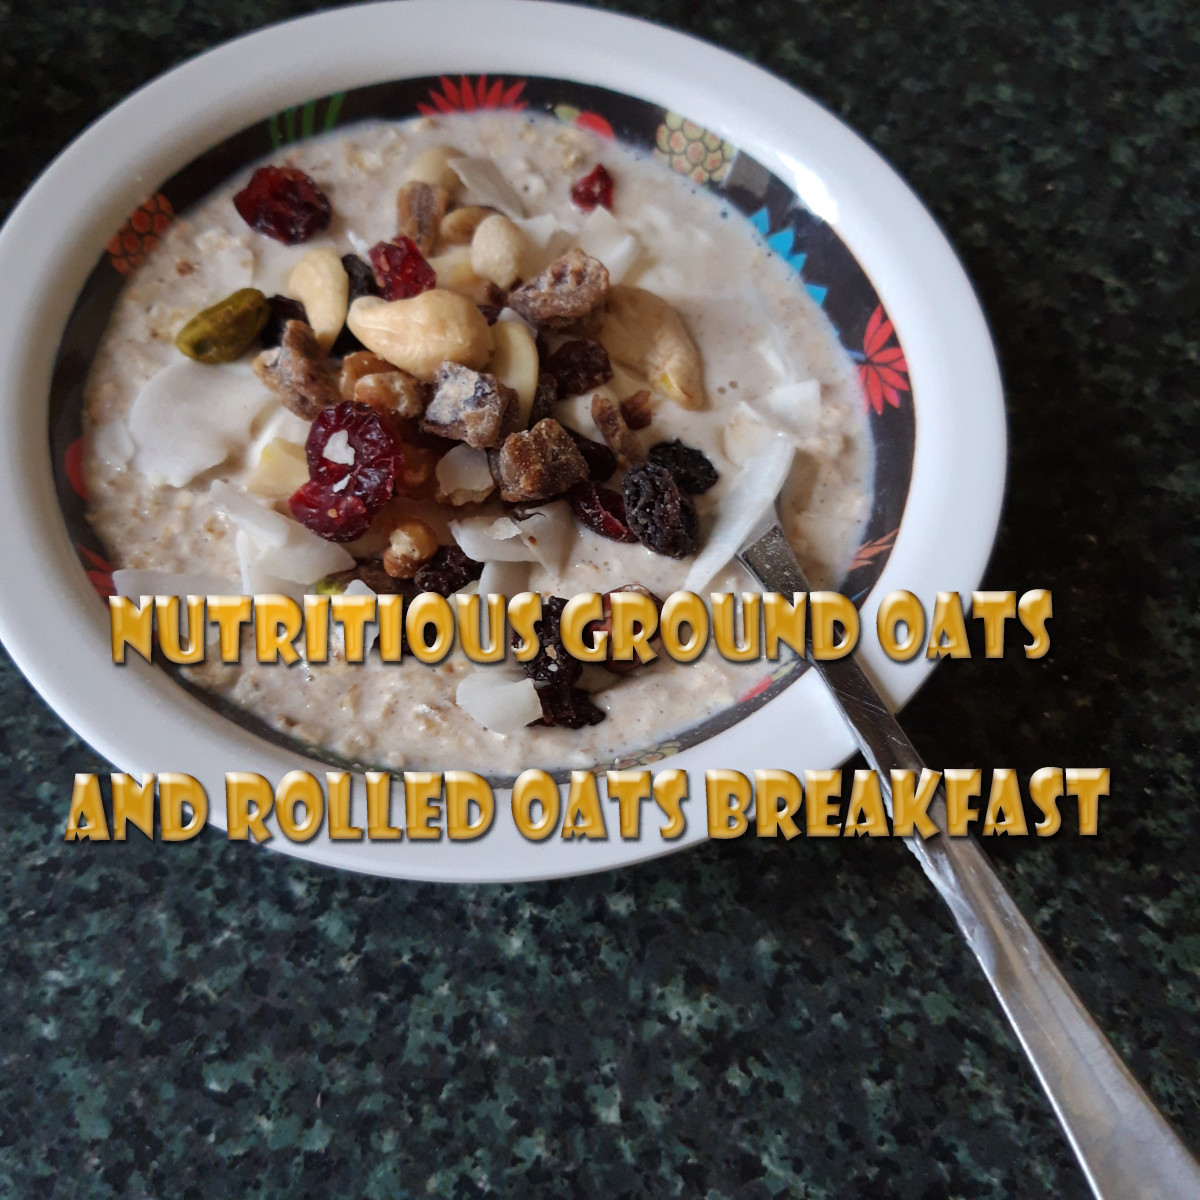 Nutritious Ground Oats and Rolled Oats Breakfast